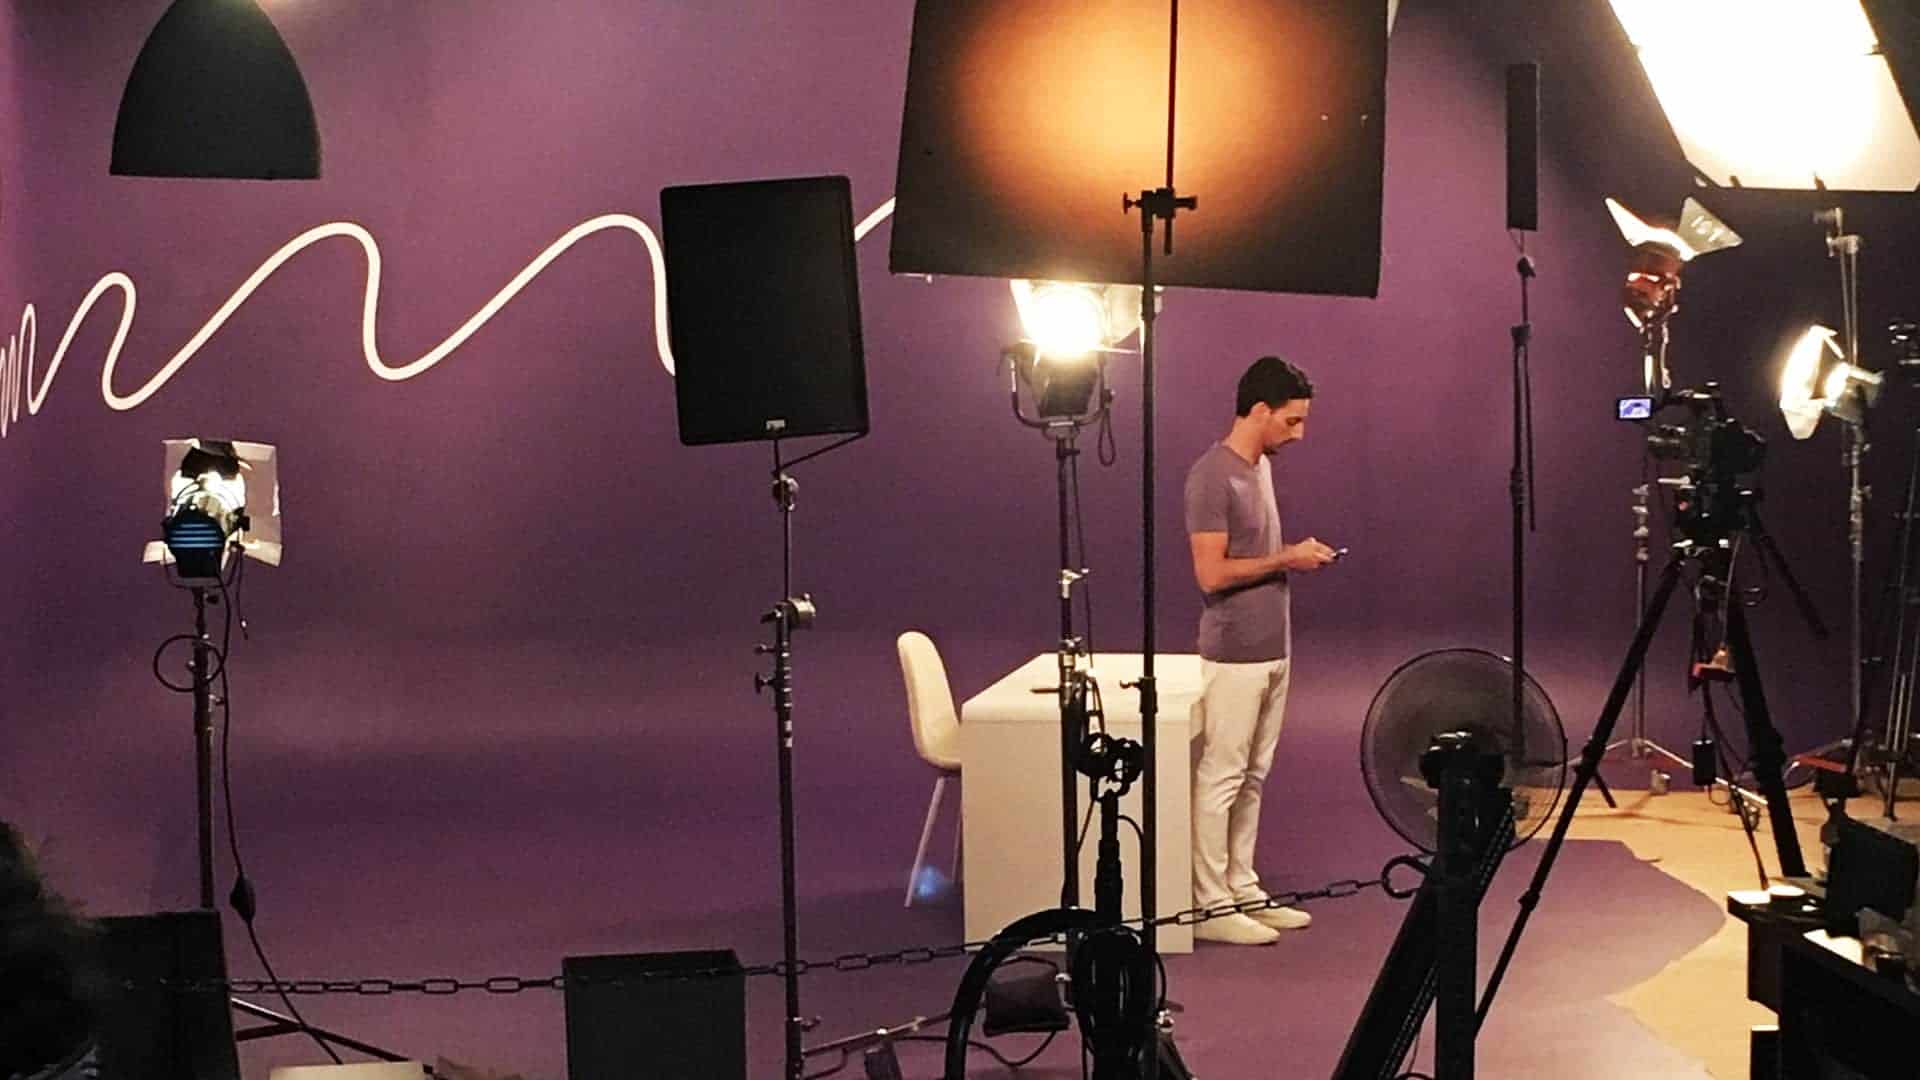 BTS shoot from craftsy on cyclorama